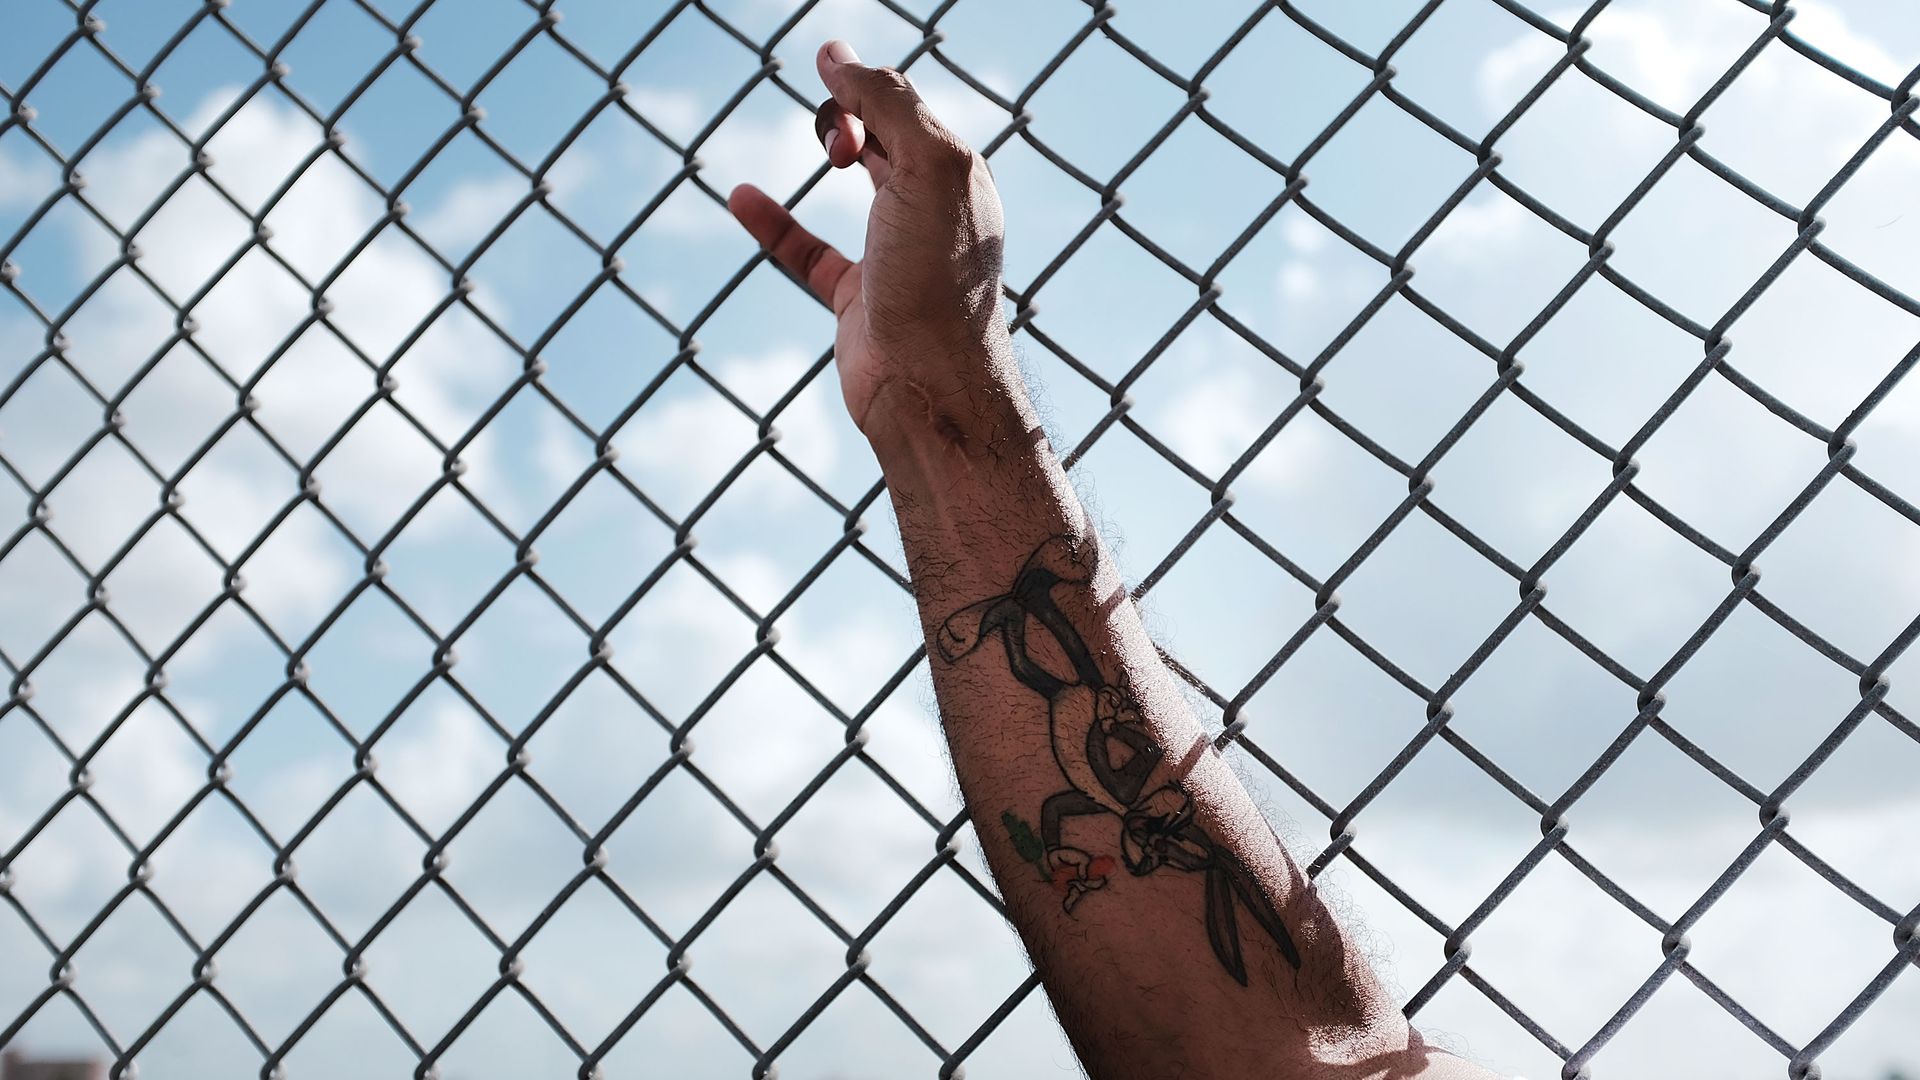 A man's arm holds a chain-link fence.